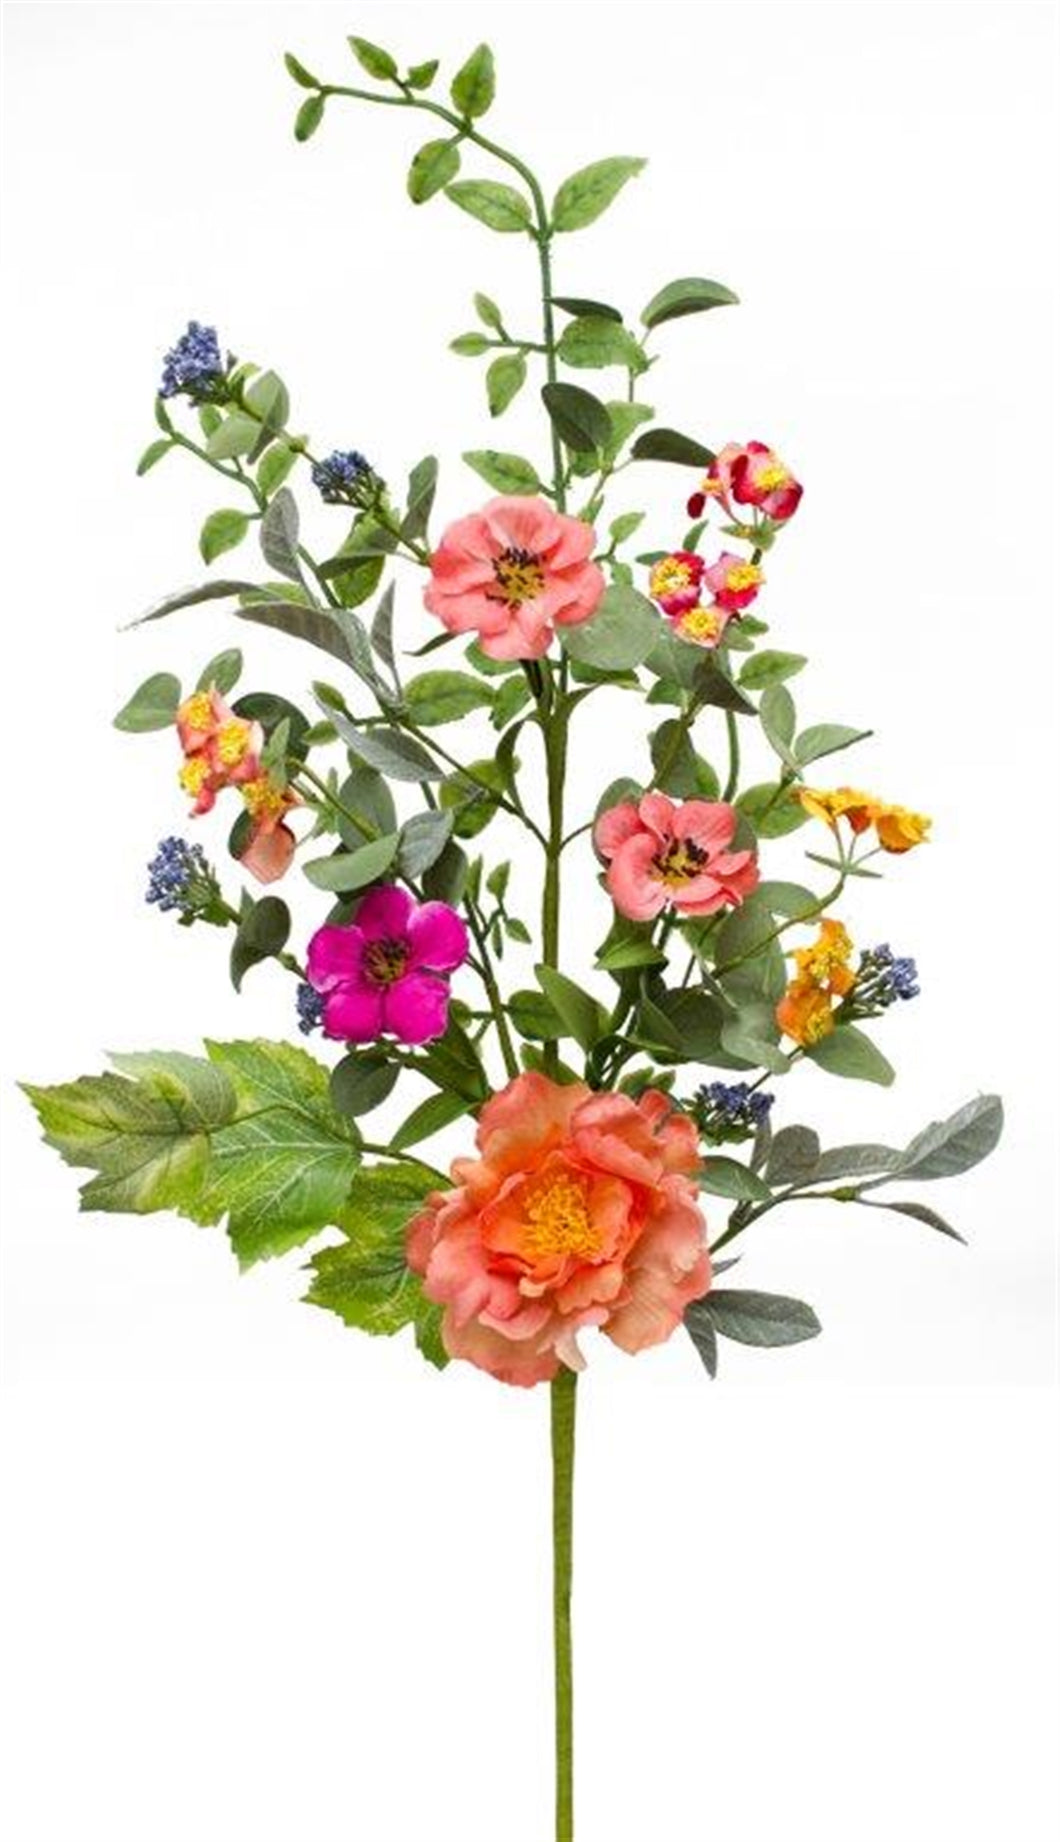 TALL SPRING FLORAL PICK BOUGUET – 34” T. ADD TO ANY VASE OR BUCKET OF SAND FOR A SPLASH OF BLOOMING SPRING FLOWERS. COLORS ARE GREEN FOLIAGE WITH ORANGE, YELL, PINK, PURPLE, AND VARIEGATED FLOWERS.